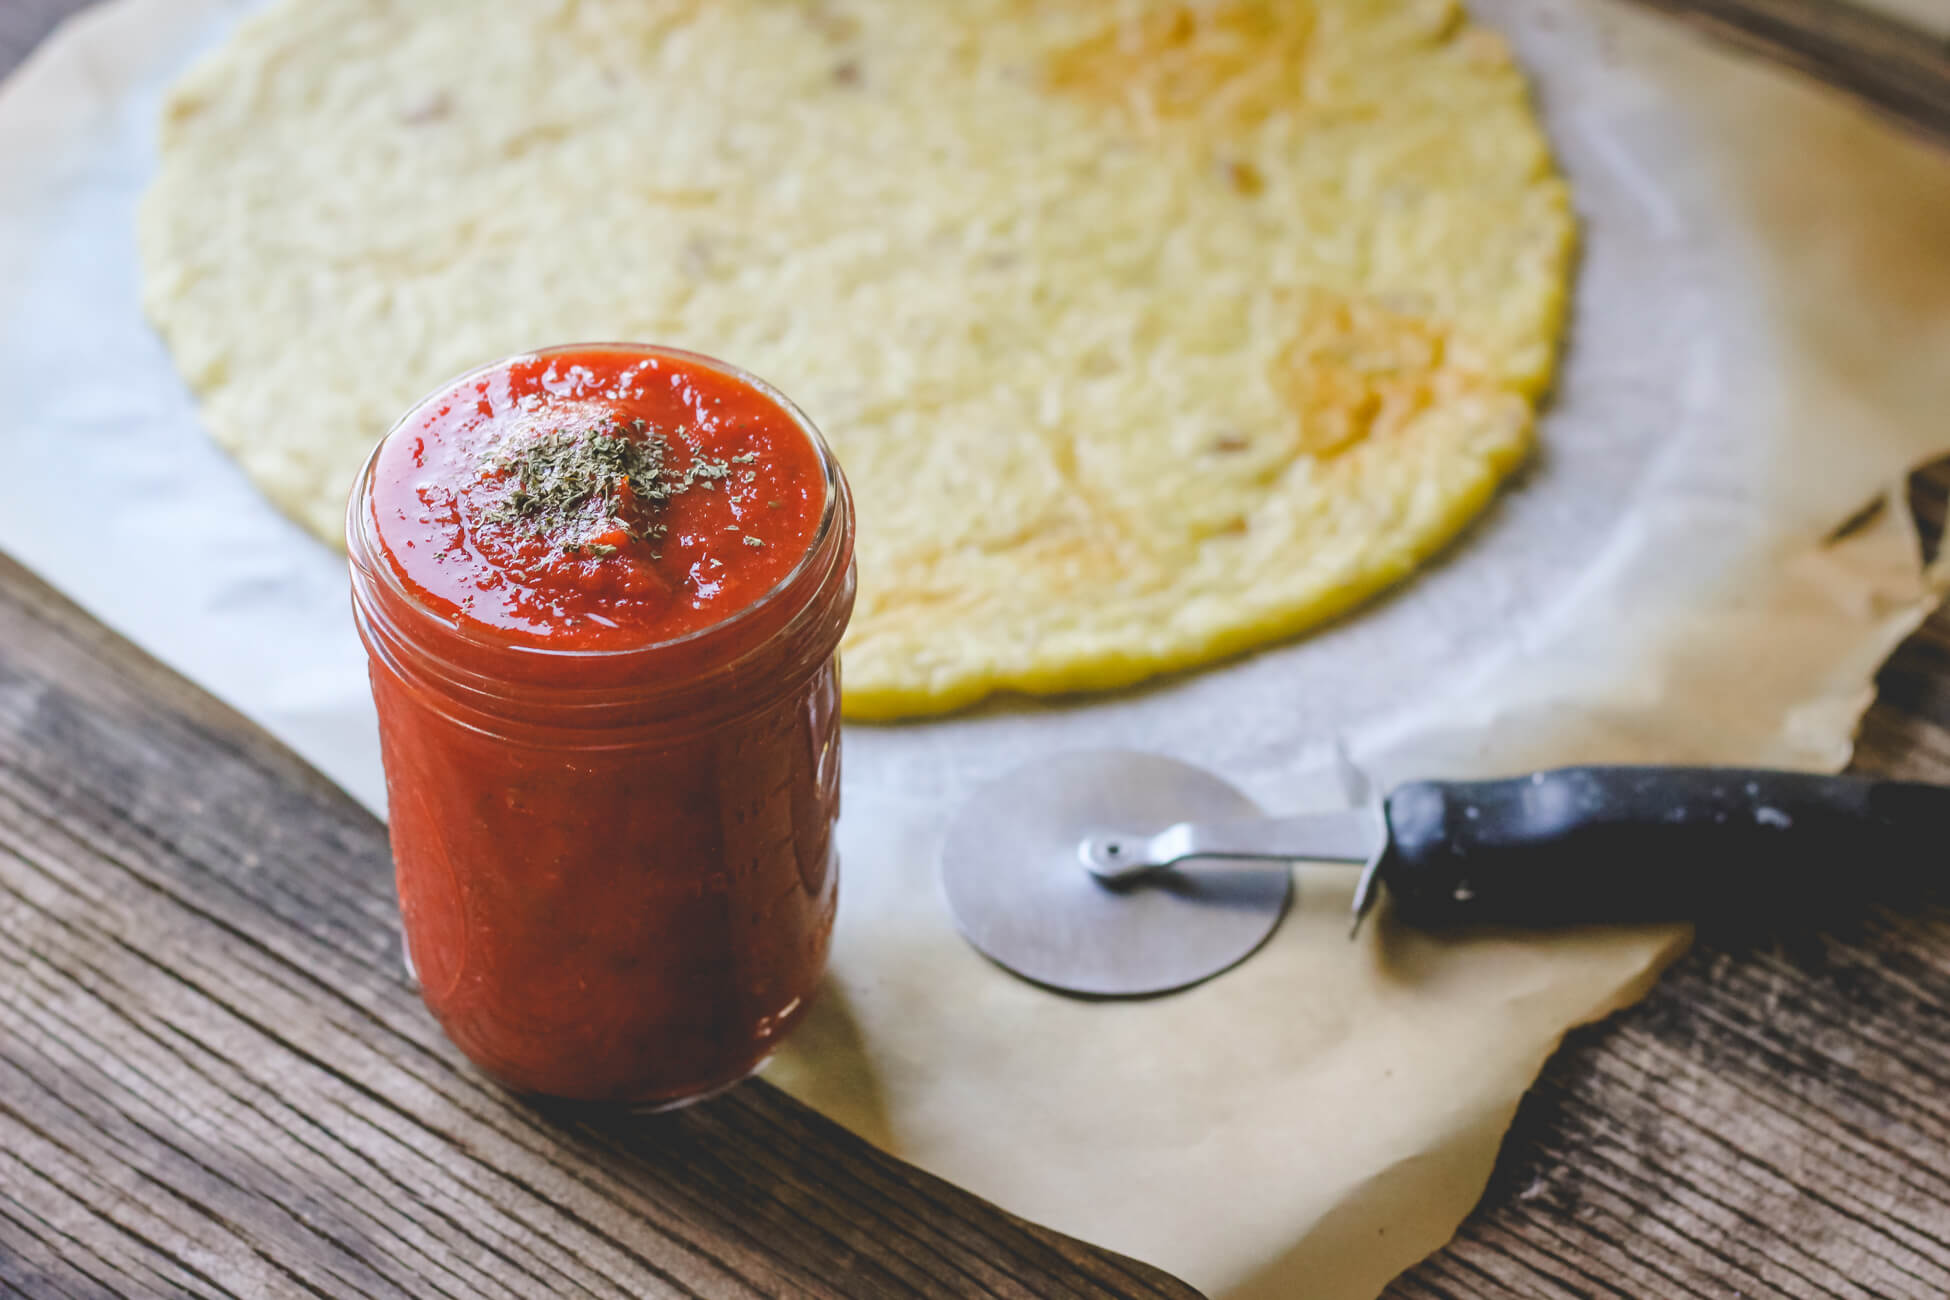 Jar of pizza sauce on wood background with pizza dough.